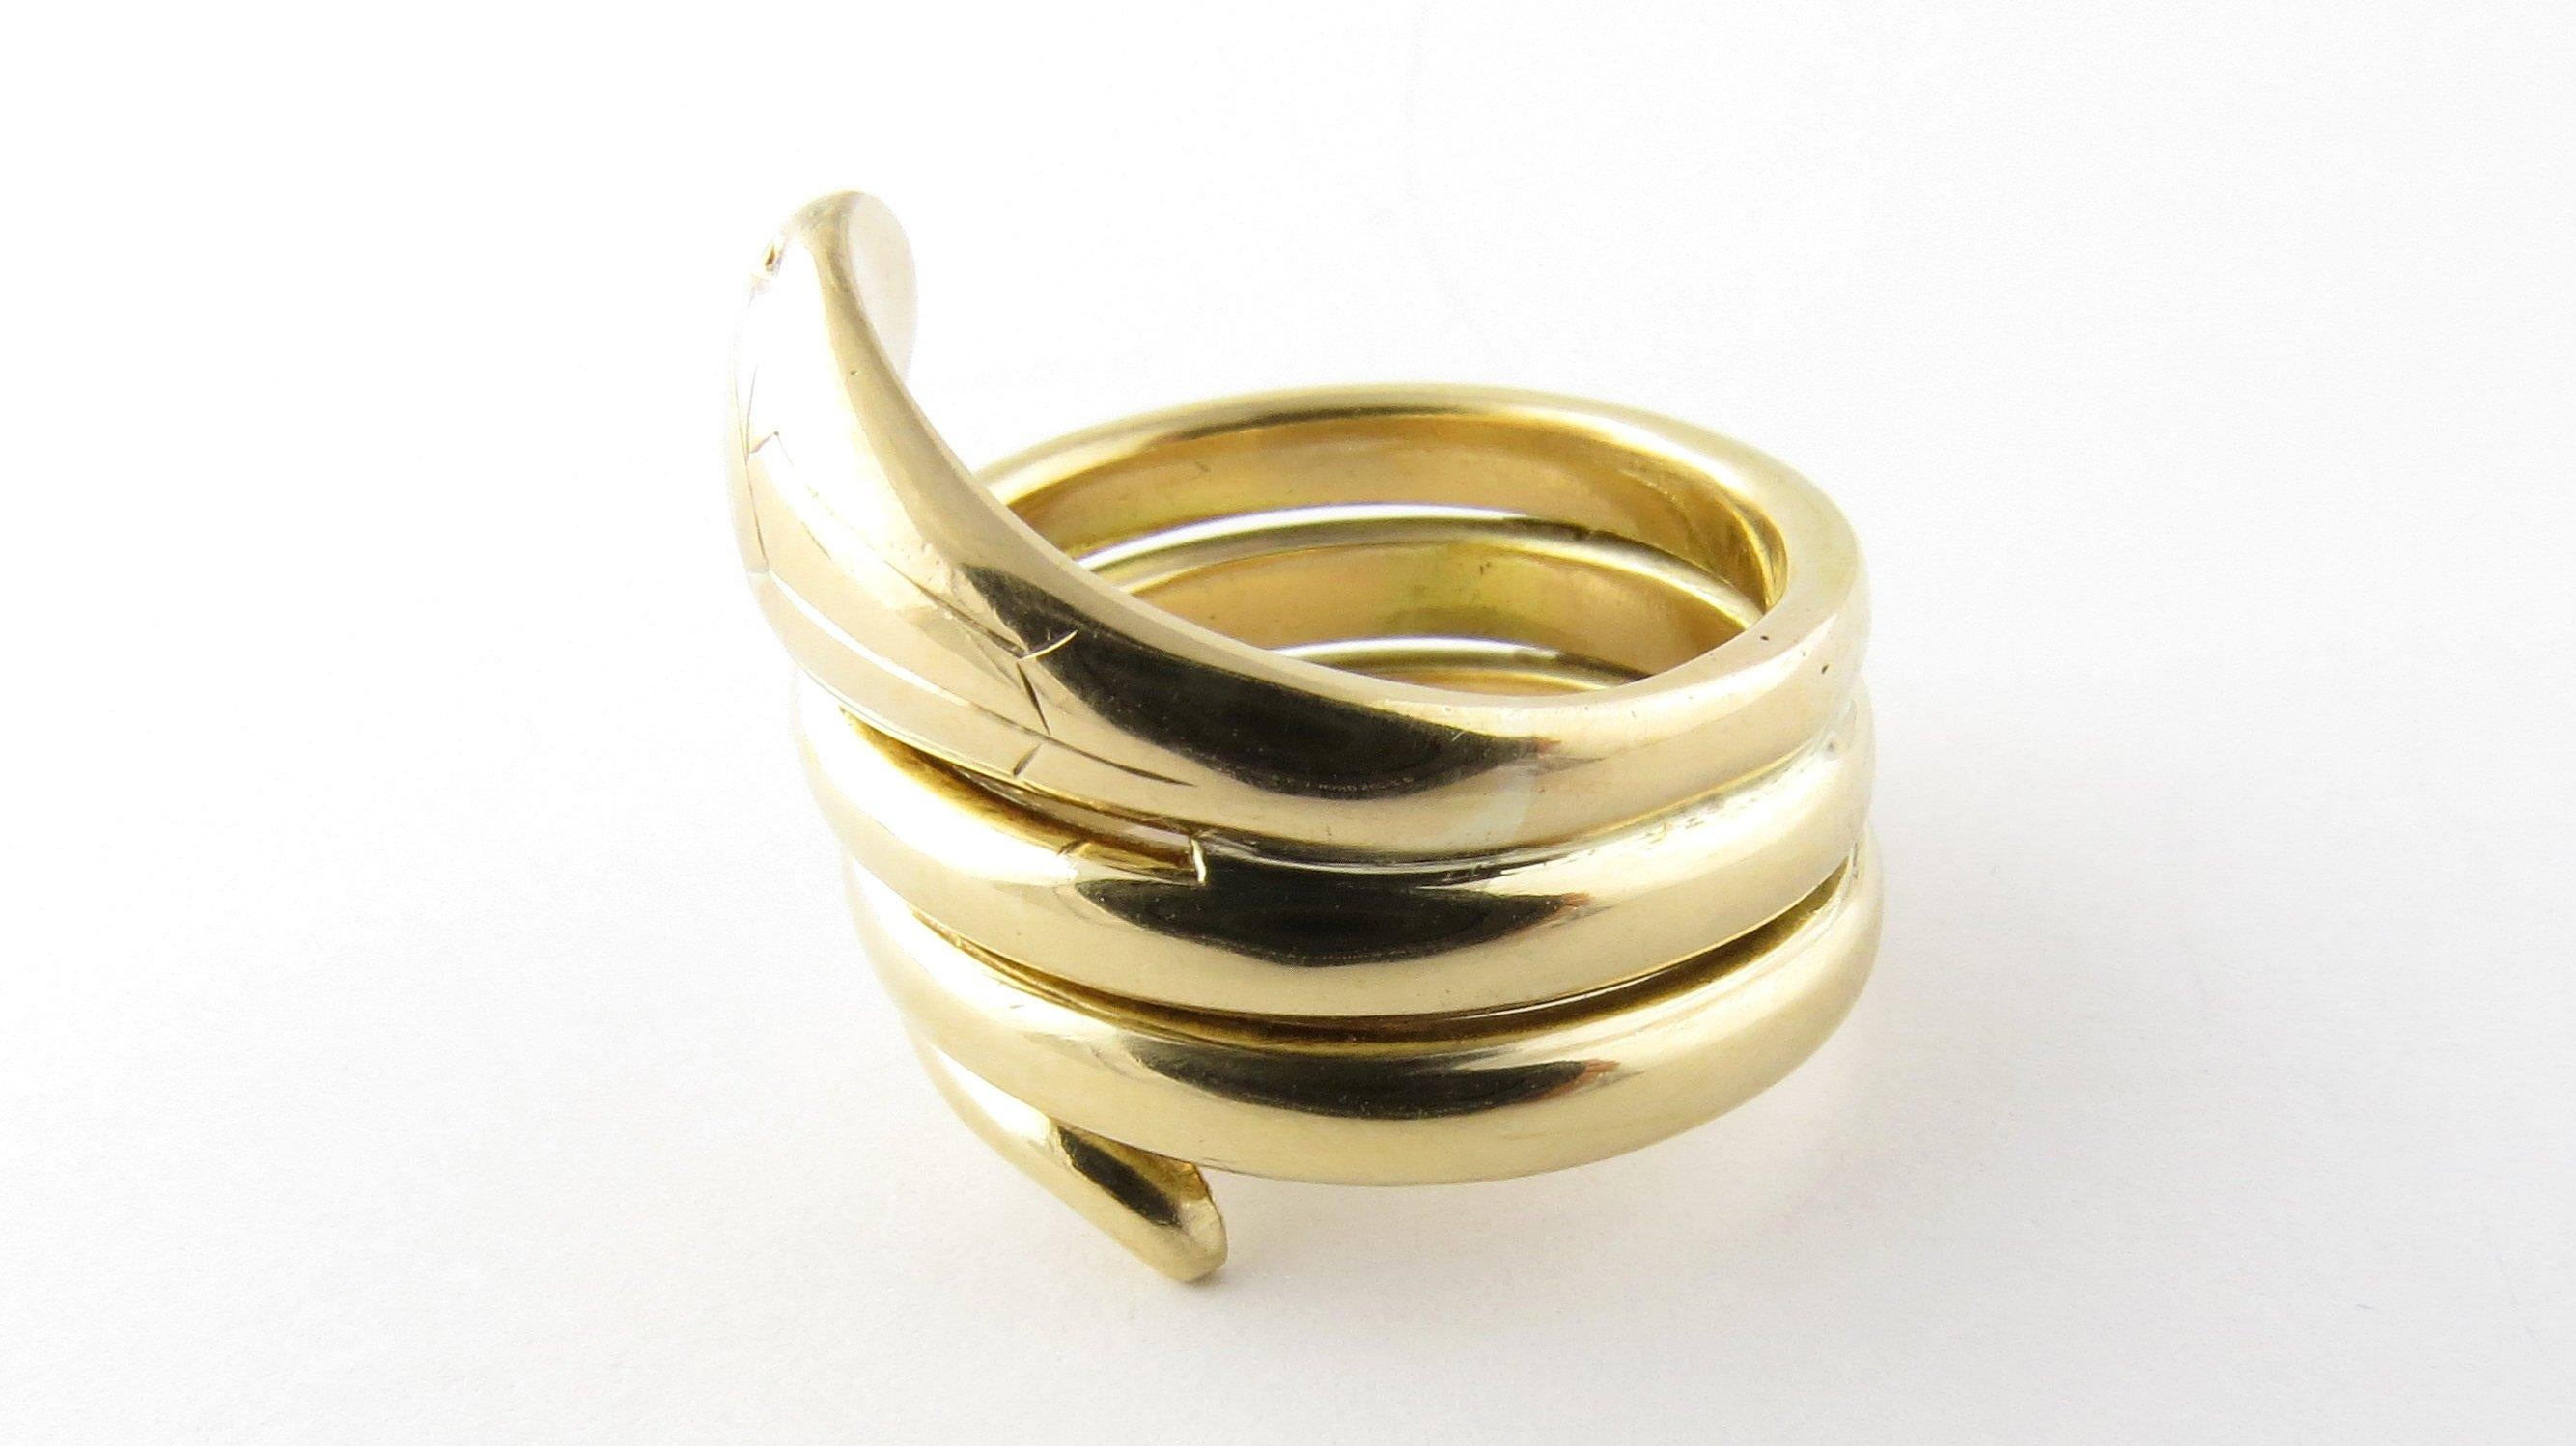 Vintage 14 Karat Yellow Gold Snake Ring Size 5

This stunning ring features a coiled snake beautifully detailed in polished 14K yellow gold. Shank measures 8 mm.

Ring Size: 5

Weight: 8.6 dwt. / 13.4 gr.

Hallmark: Acid tested for 14K gold.

Very